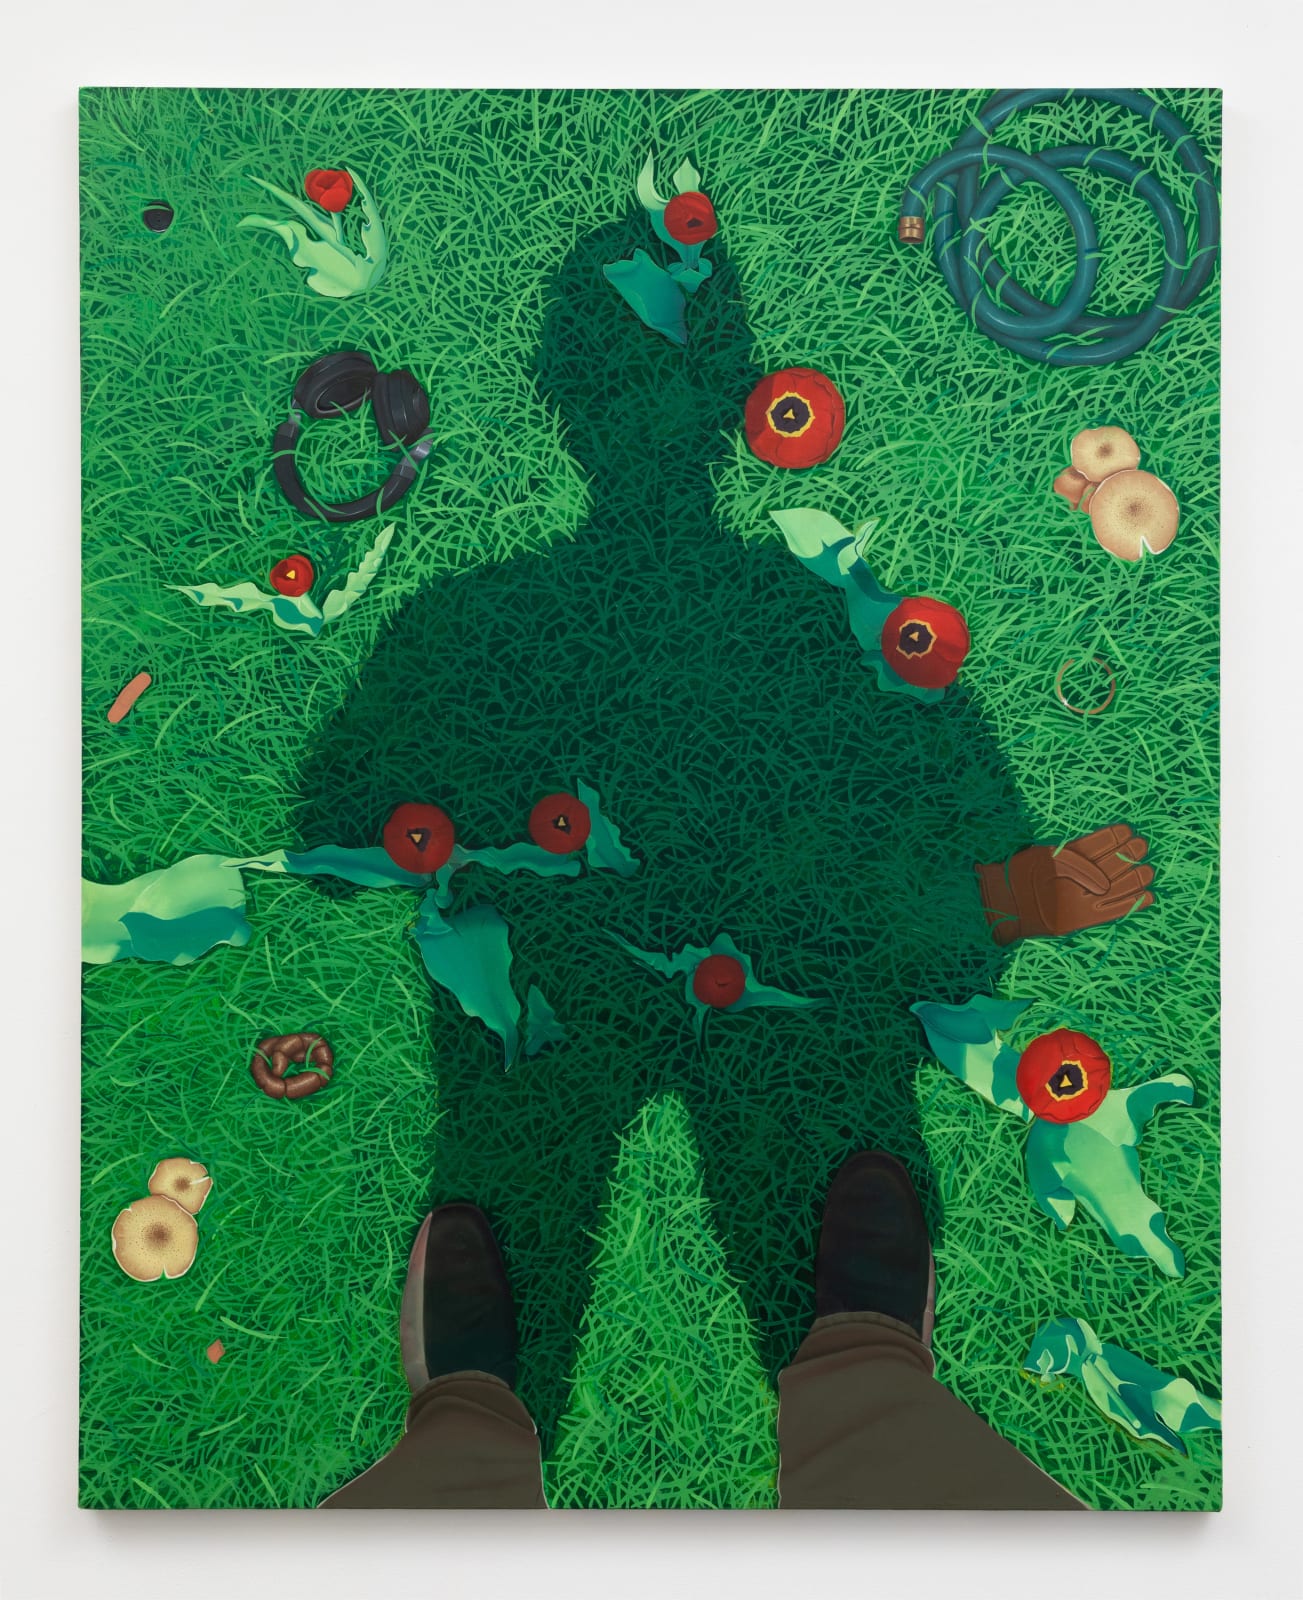 Painting showing a shadow of a male figure cast over a bed of green grass, mushrooms, tulips, feces, a headphone, and garden hose.